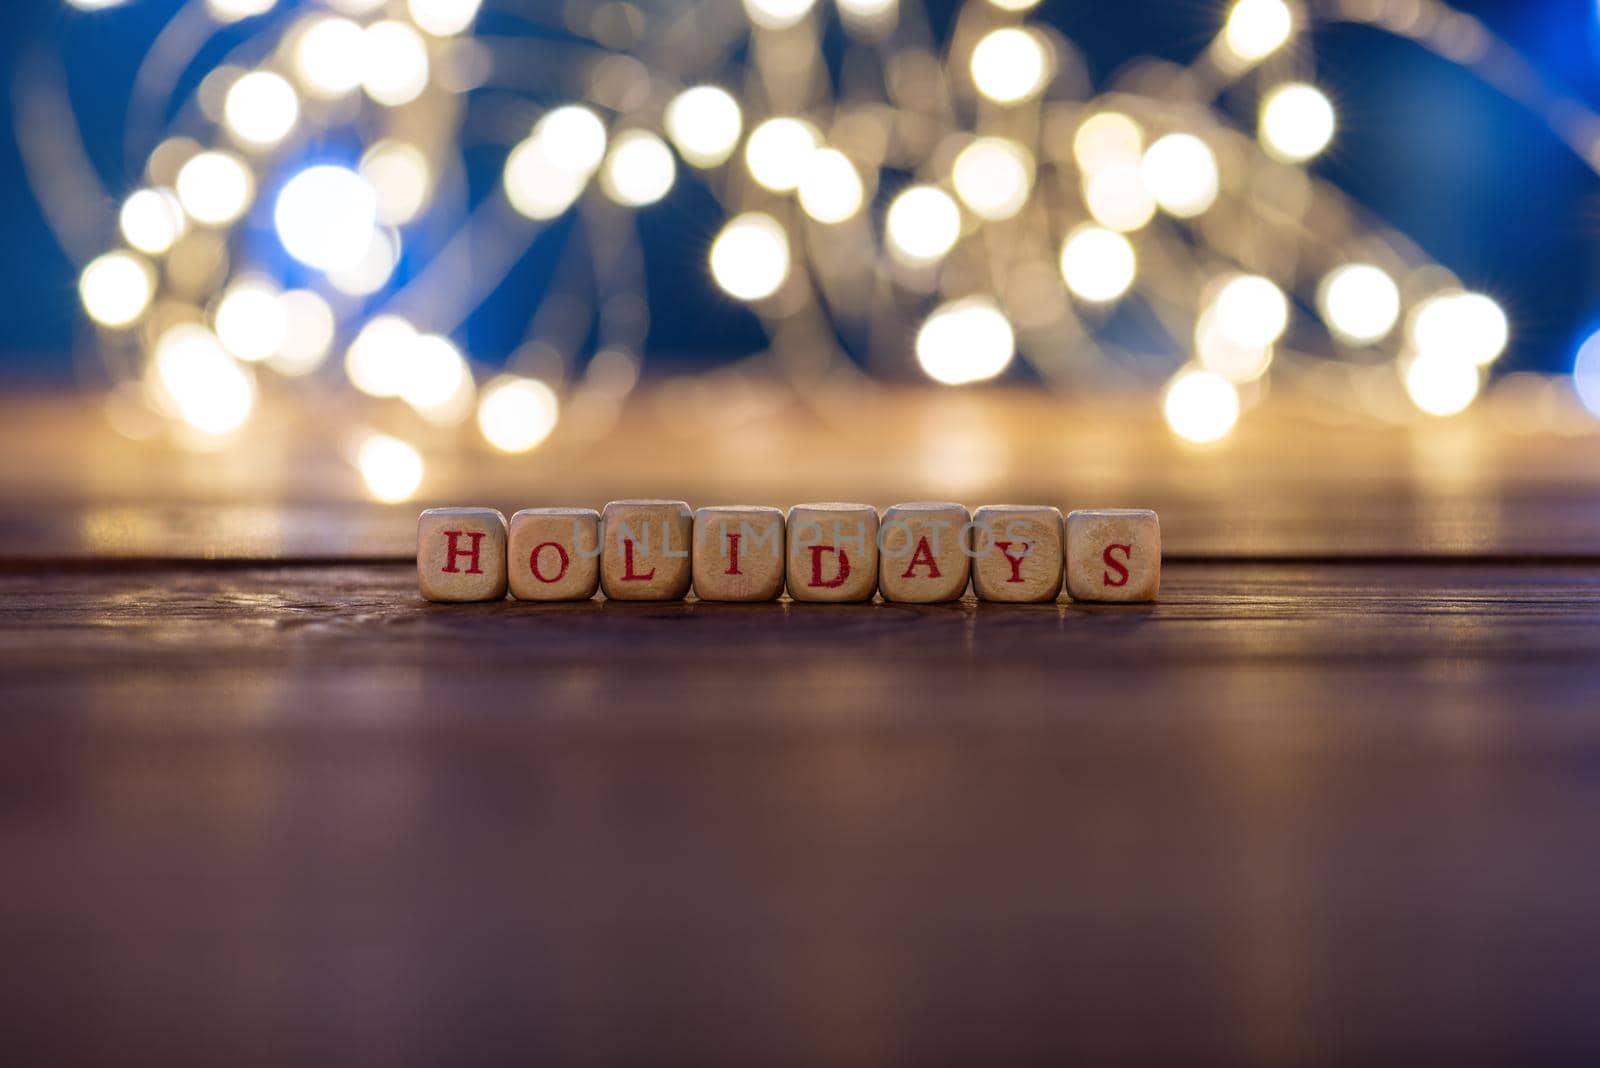 Happy holidays written on a rustic wooden panel. With background lights.